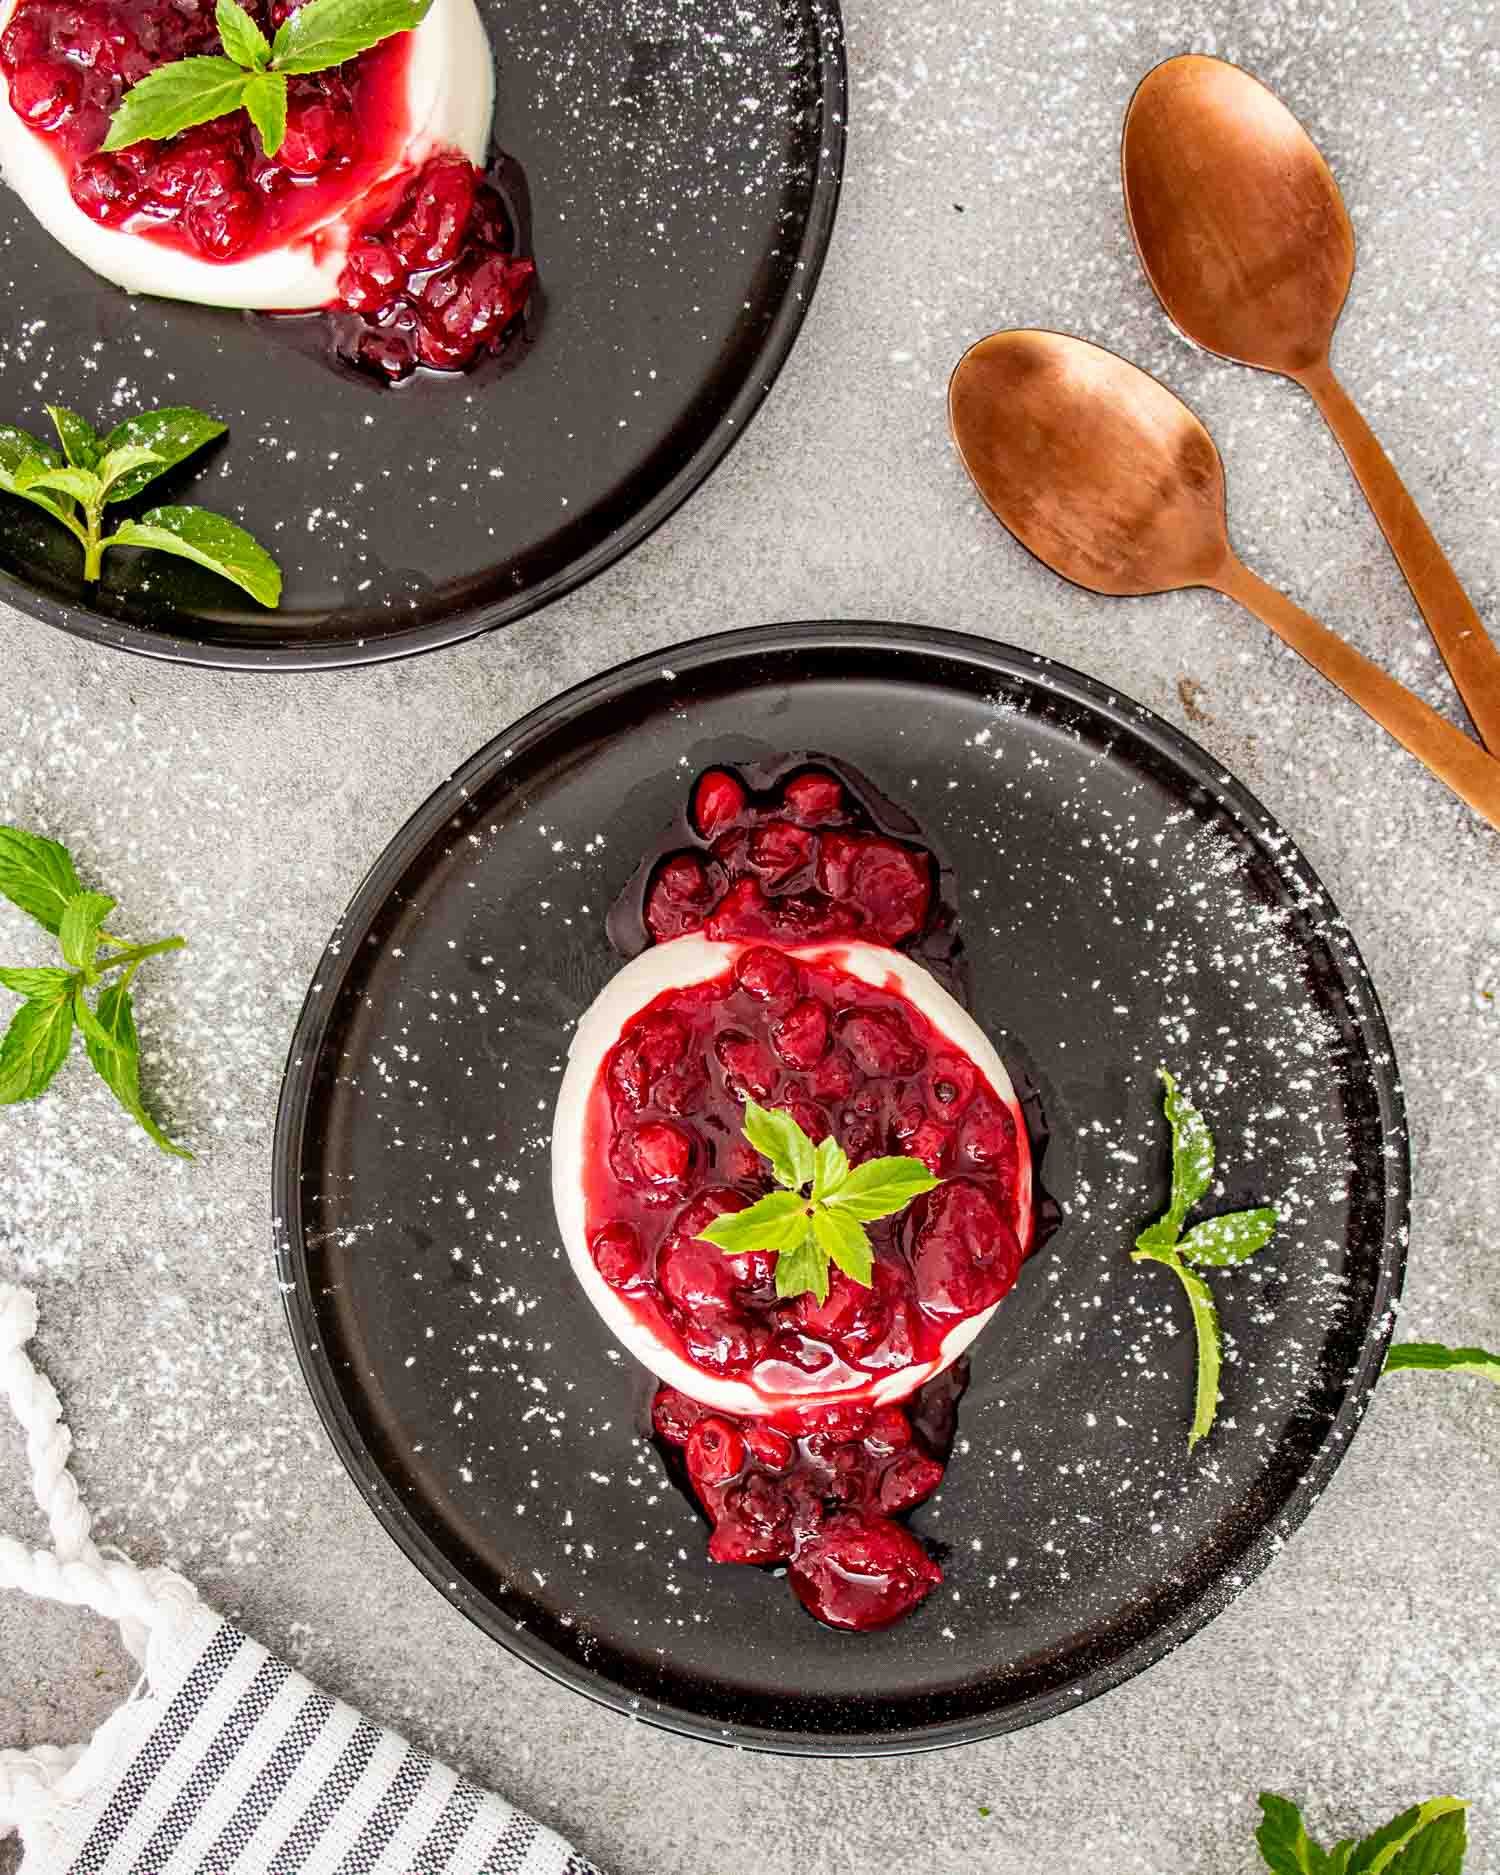 Panna cotta topped with vibrant red berry sauce and a sprig of mint on a dark plate.